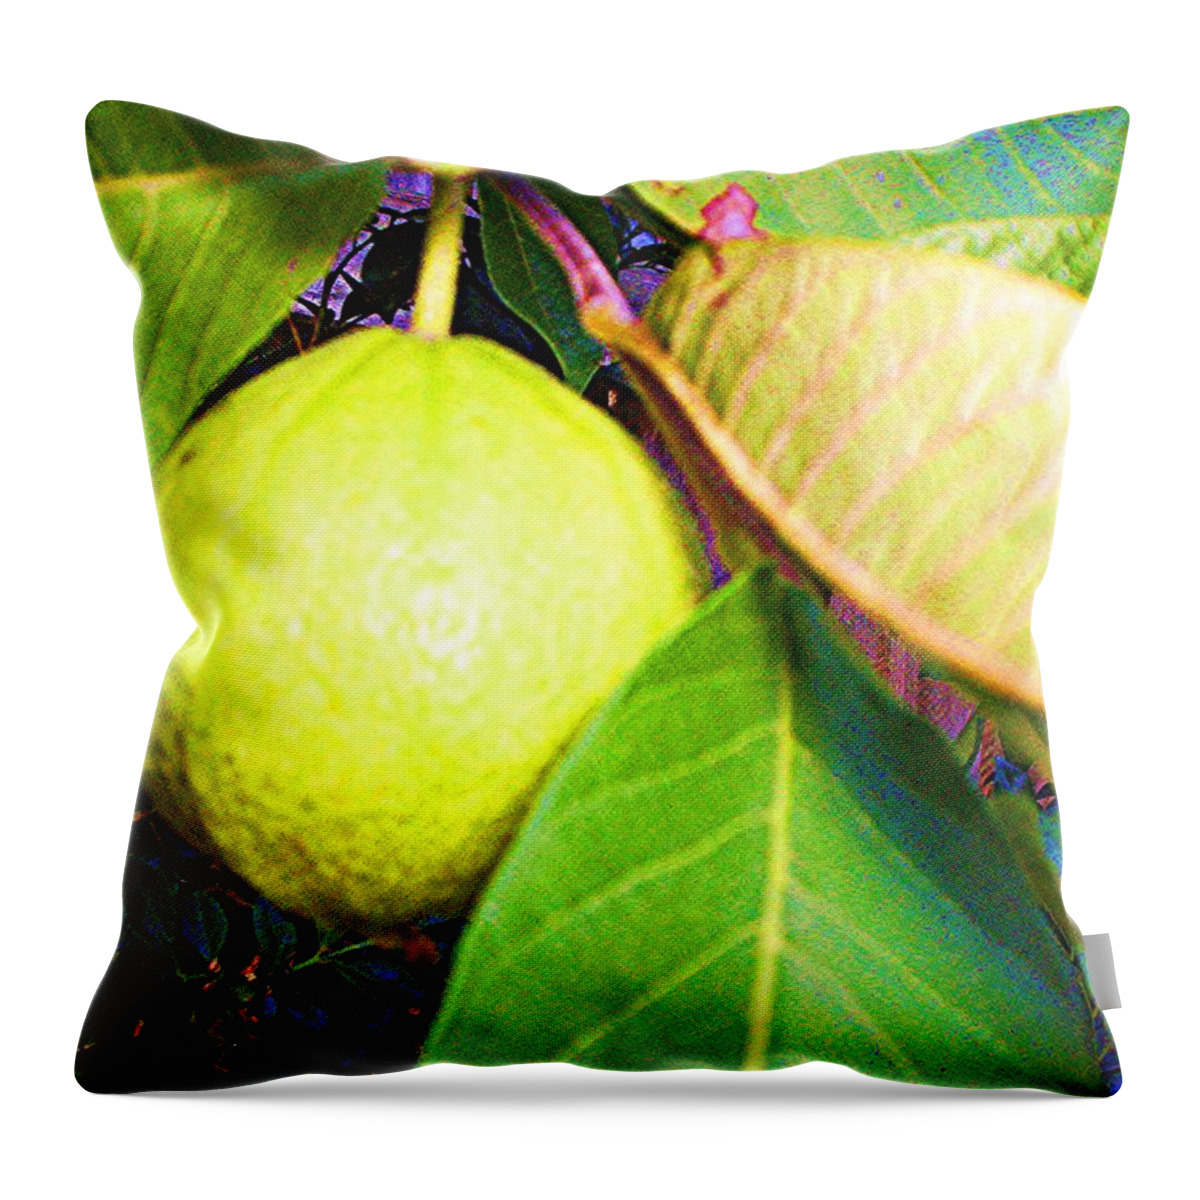 Rose Apple Throw Pillow featuring the digital art The Rose Apple by Winsome Gunning